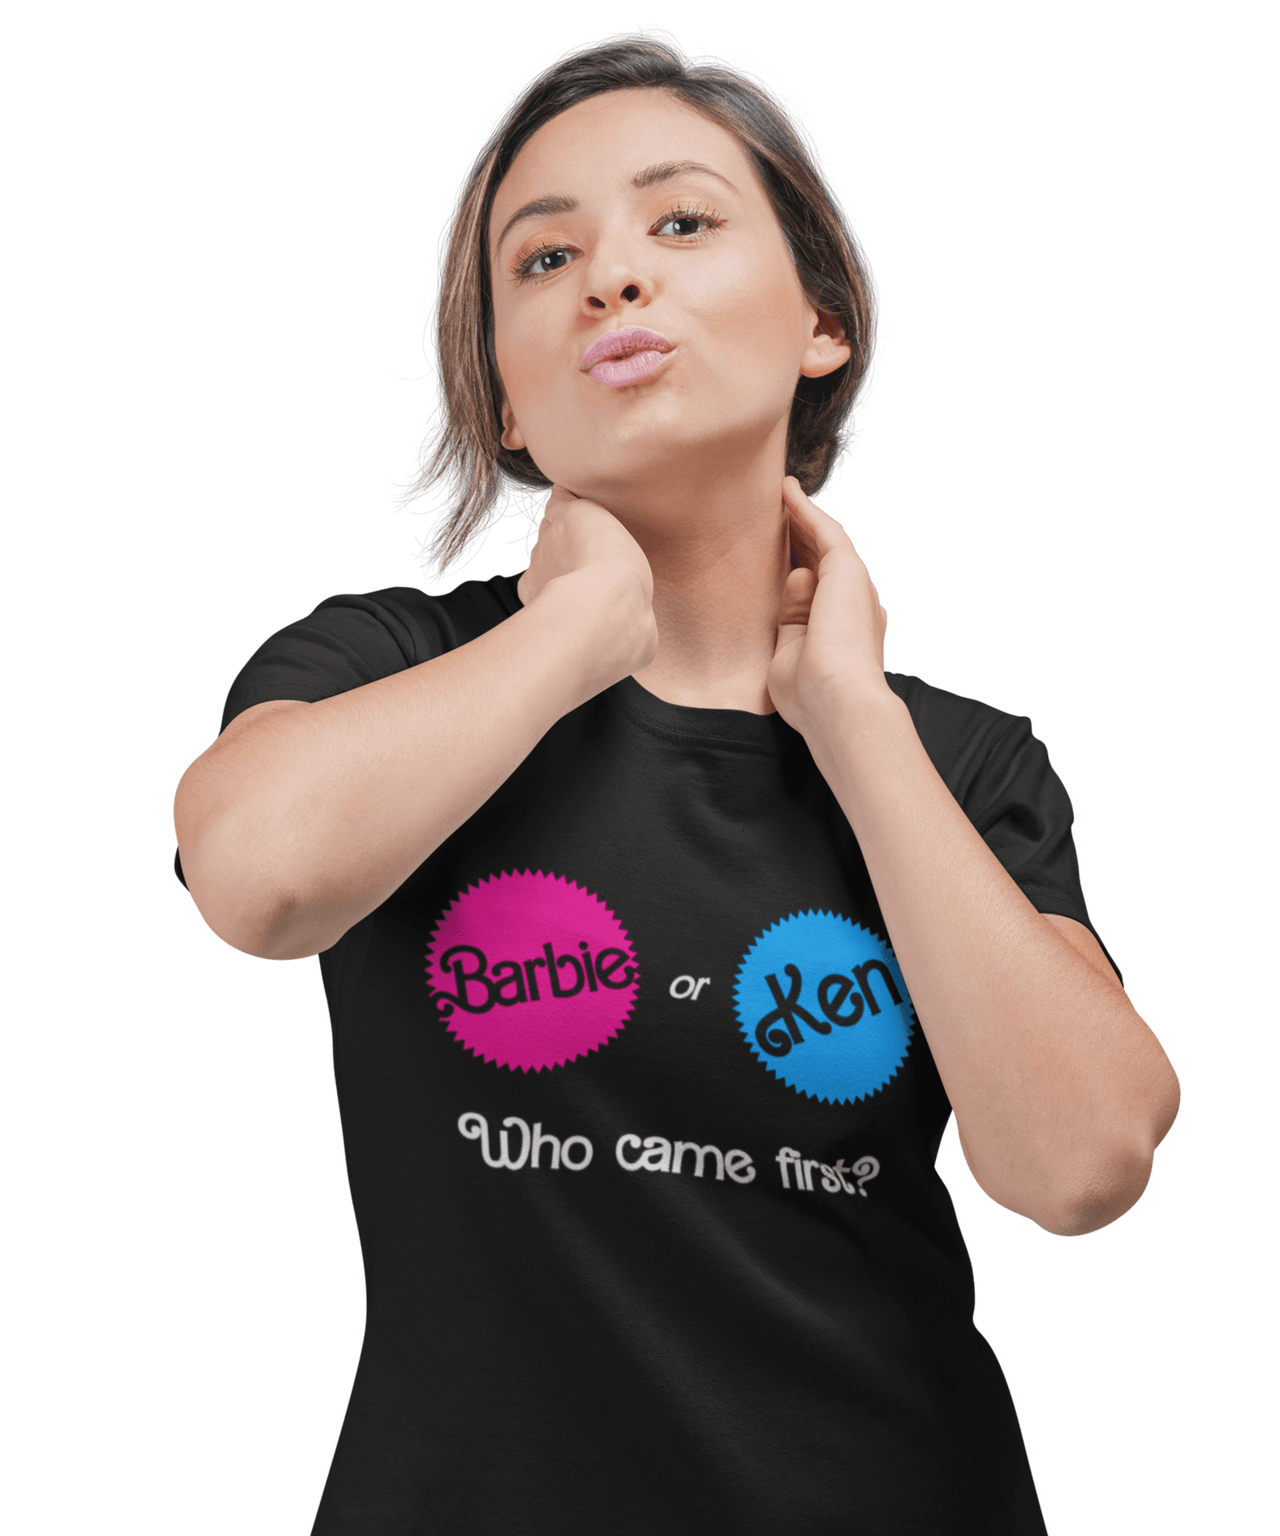 Who Came First Barbie Or Ken Adult Unisex Black or White Mens T-Shirt 8Ball